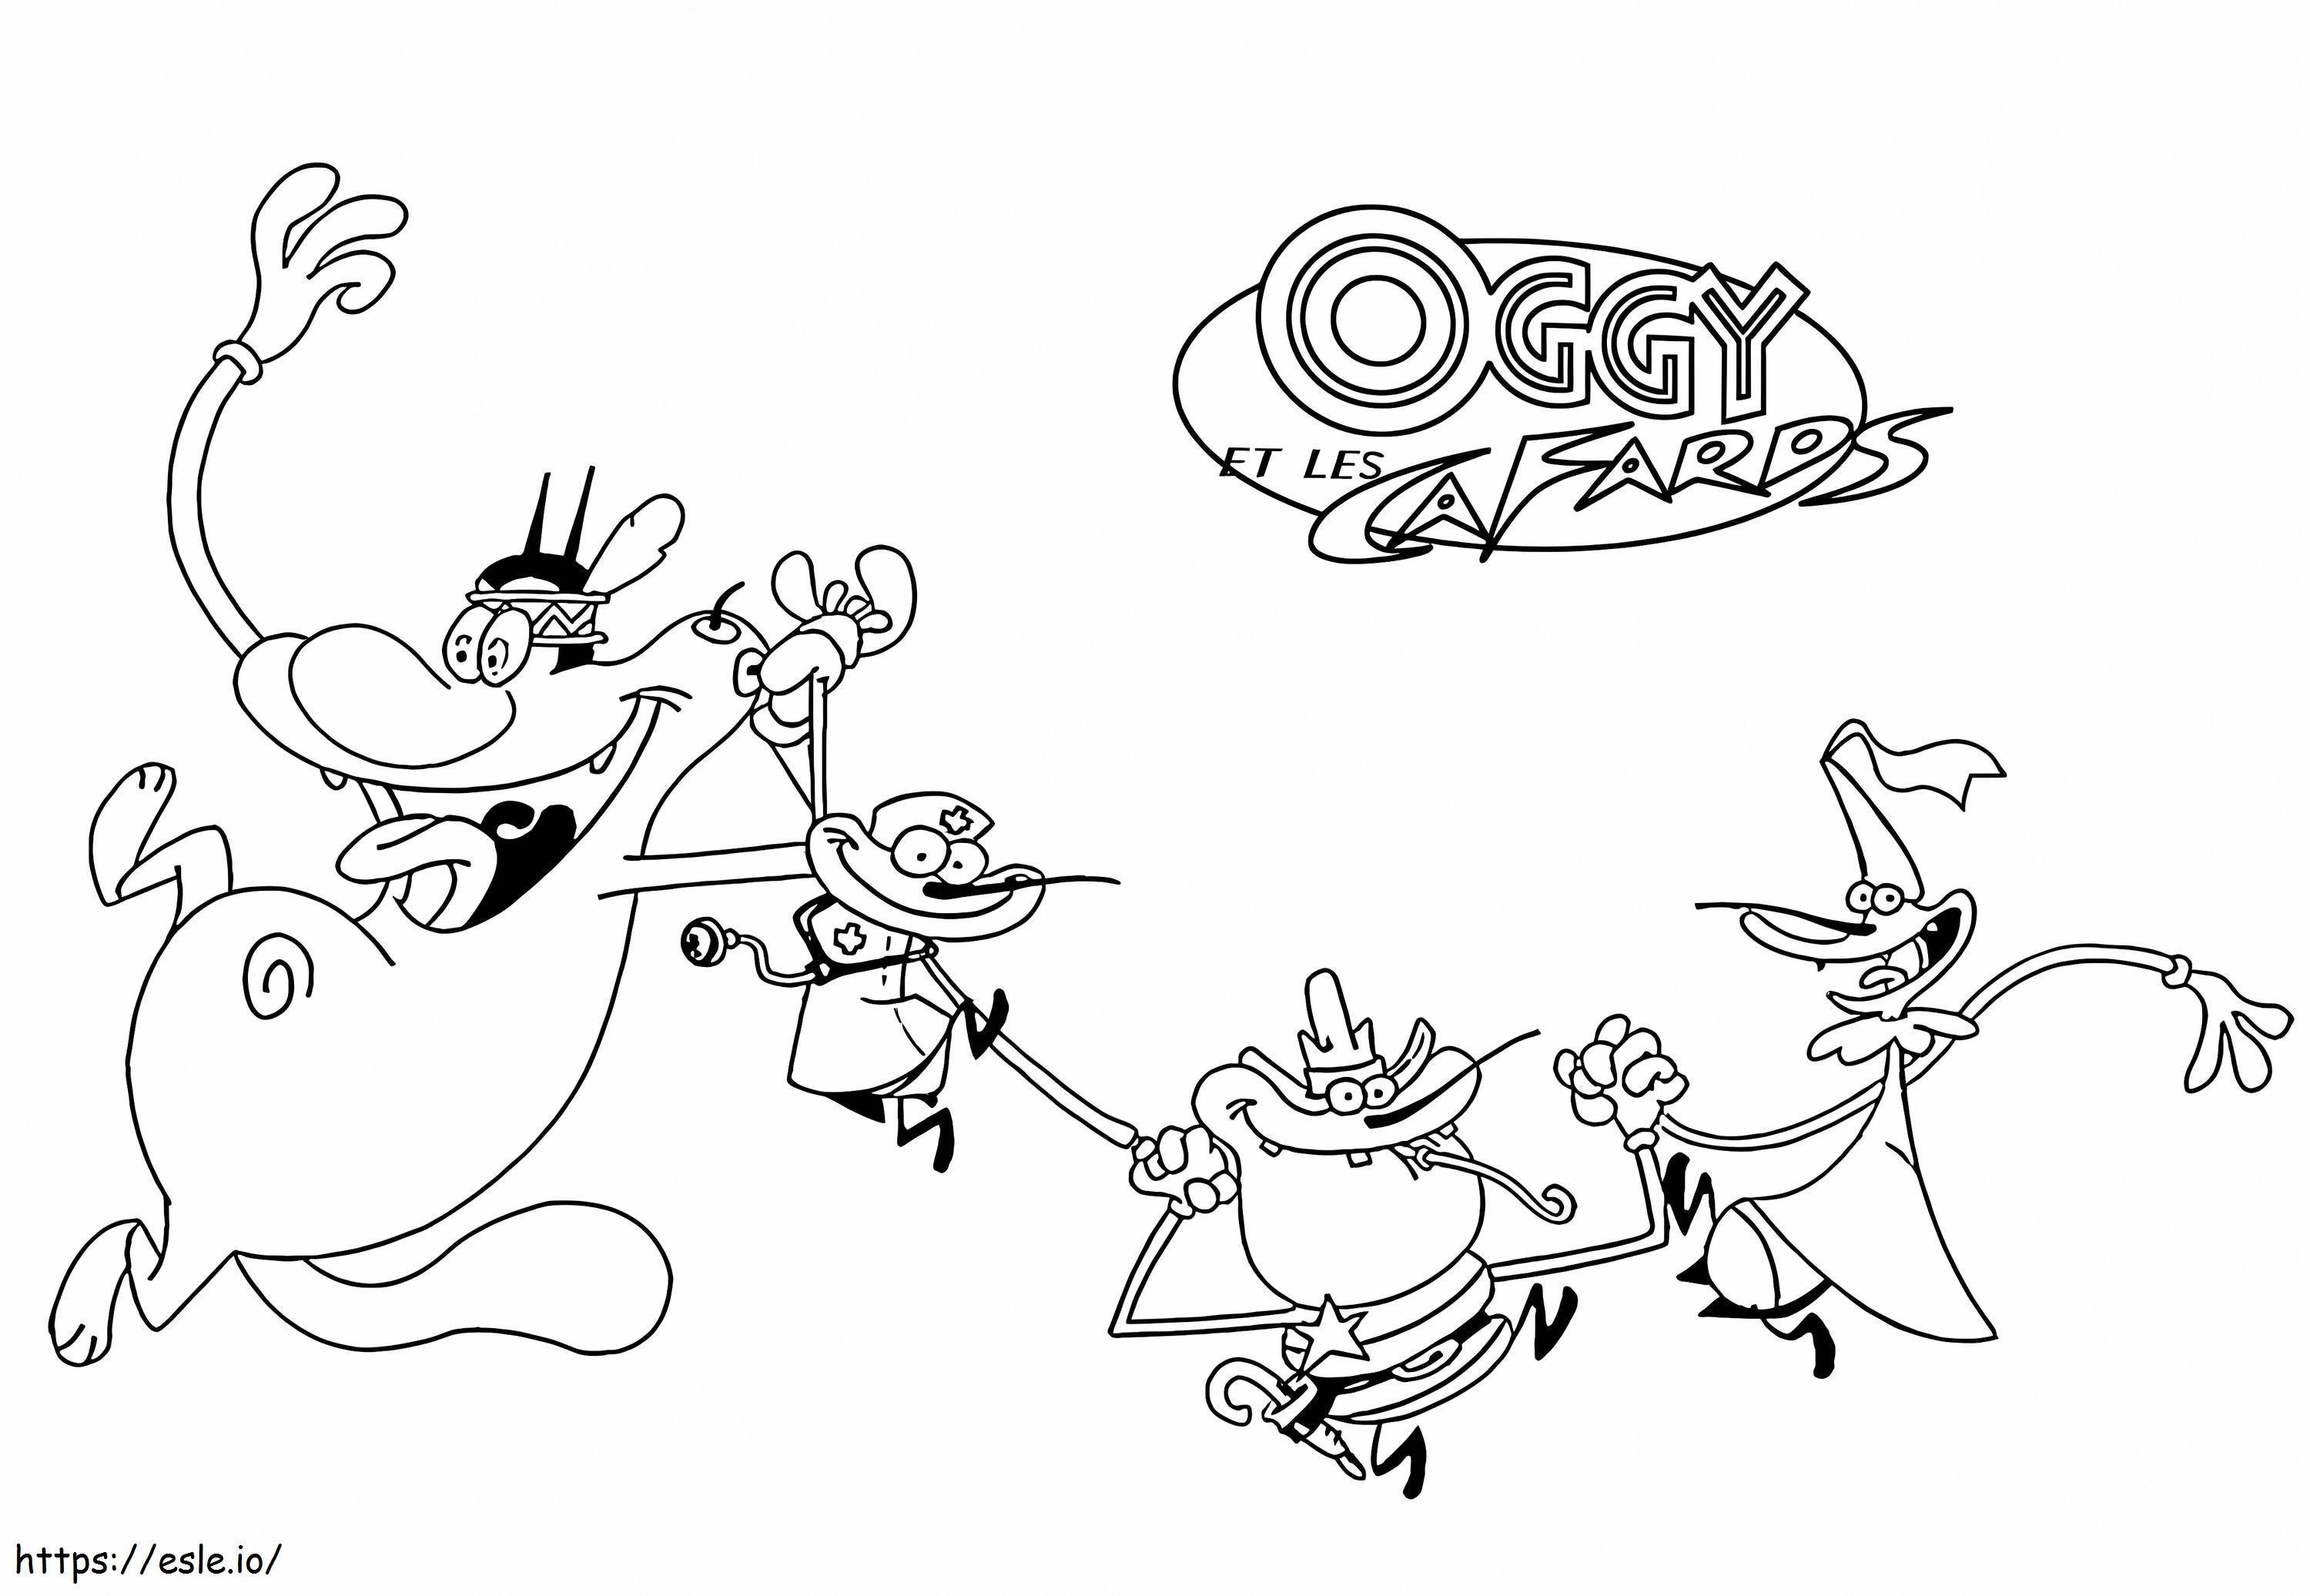 Funny Oggy And The Cockroaches coloring page